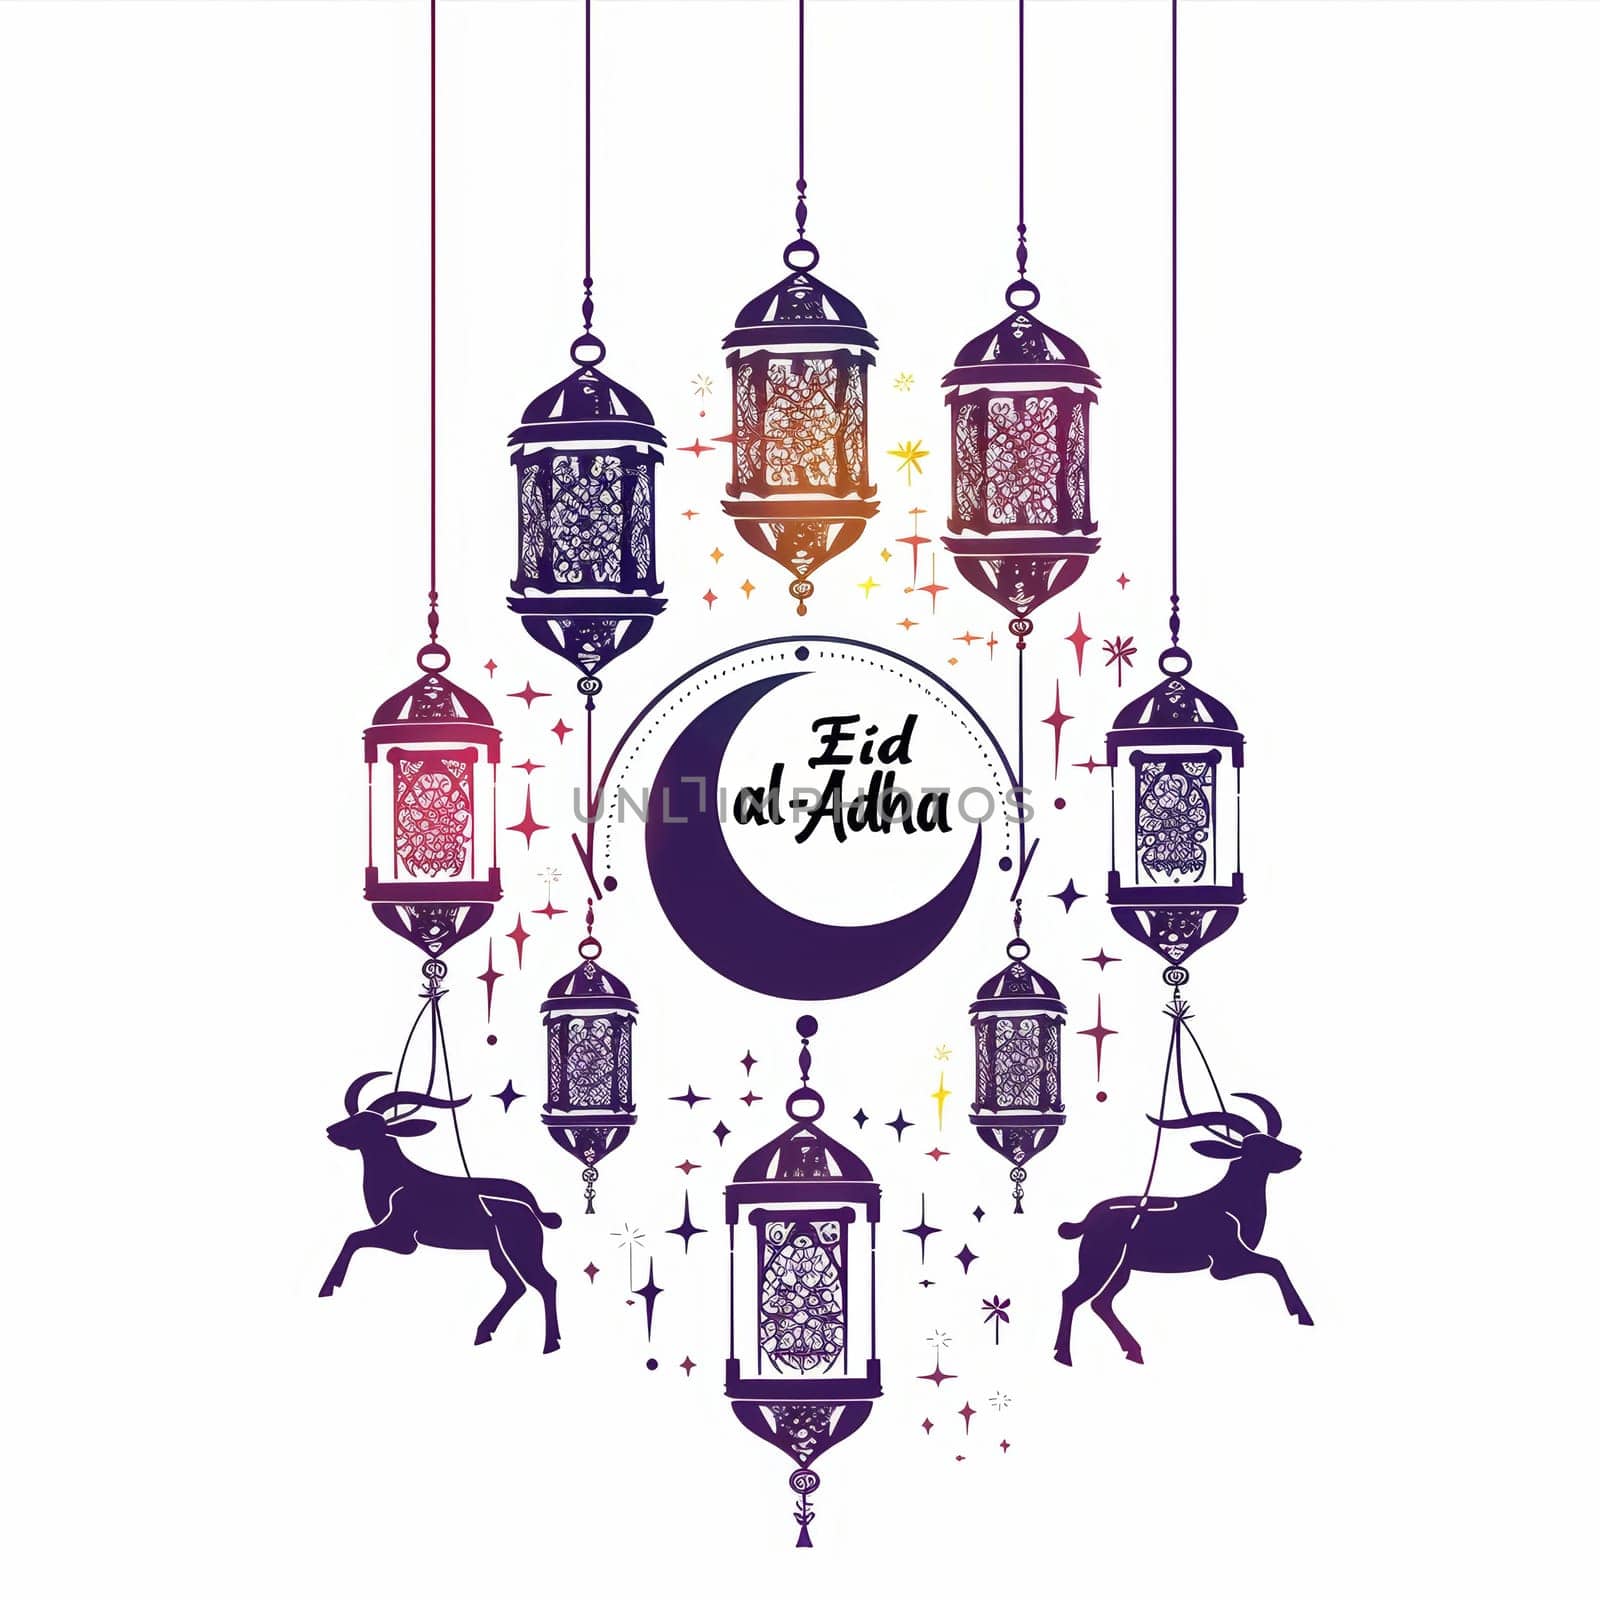 A colorful Eid al-Adha greeting with detailed lanterns and starry accents, featuring a leaping goat